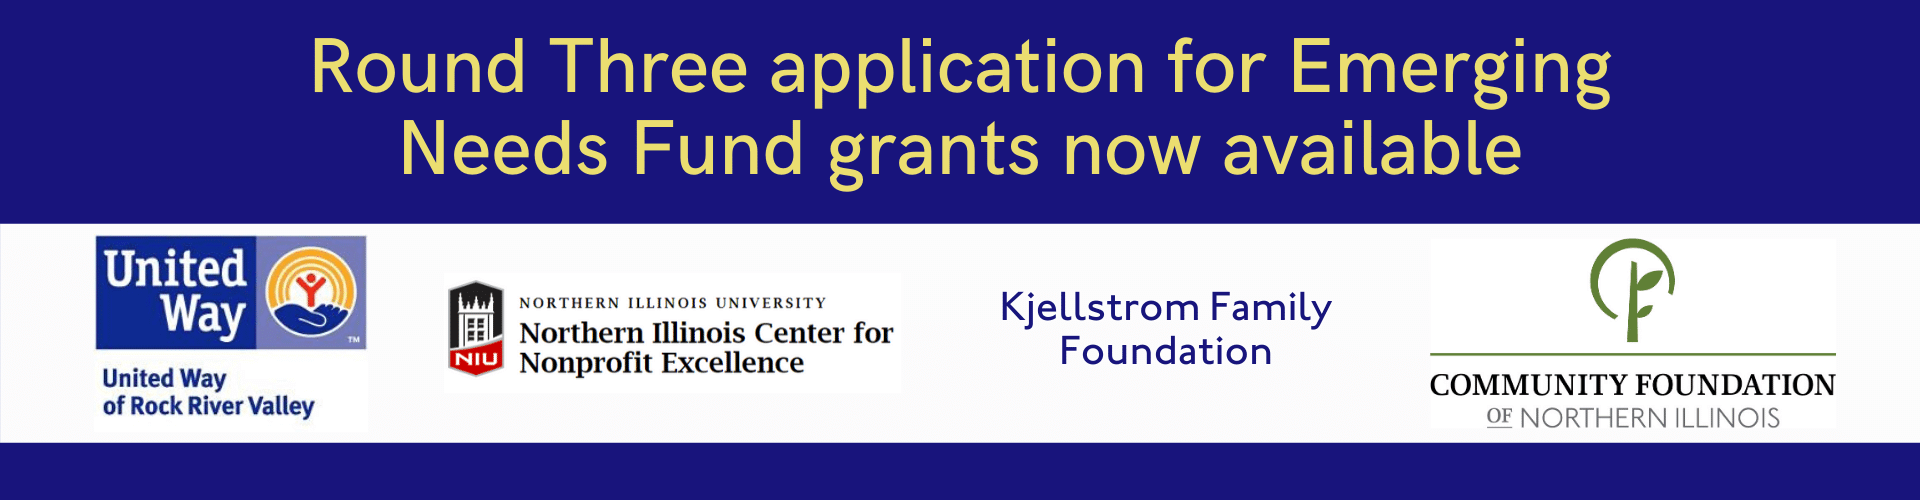 Round Three Application for Emerging Needs Fund Grants Now Available